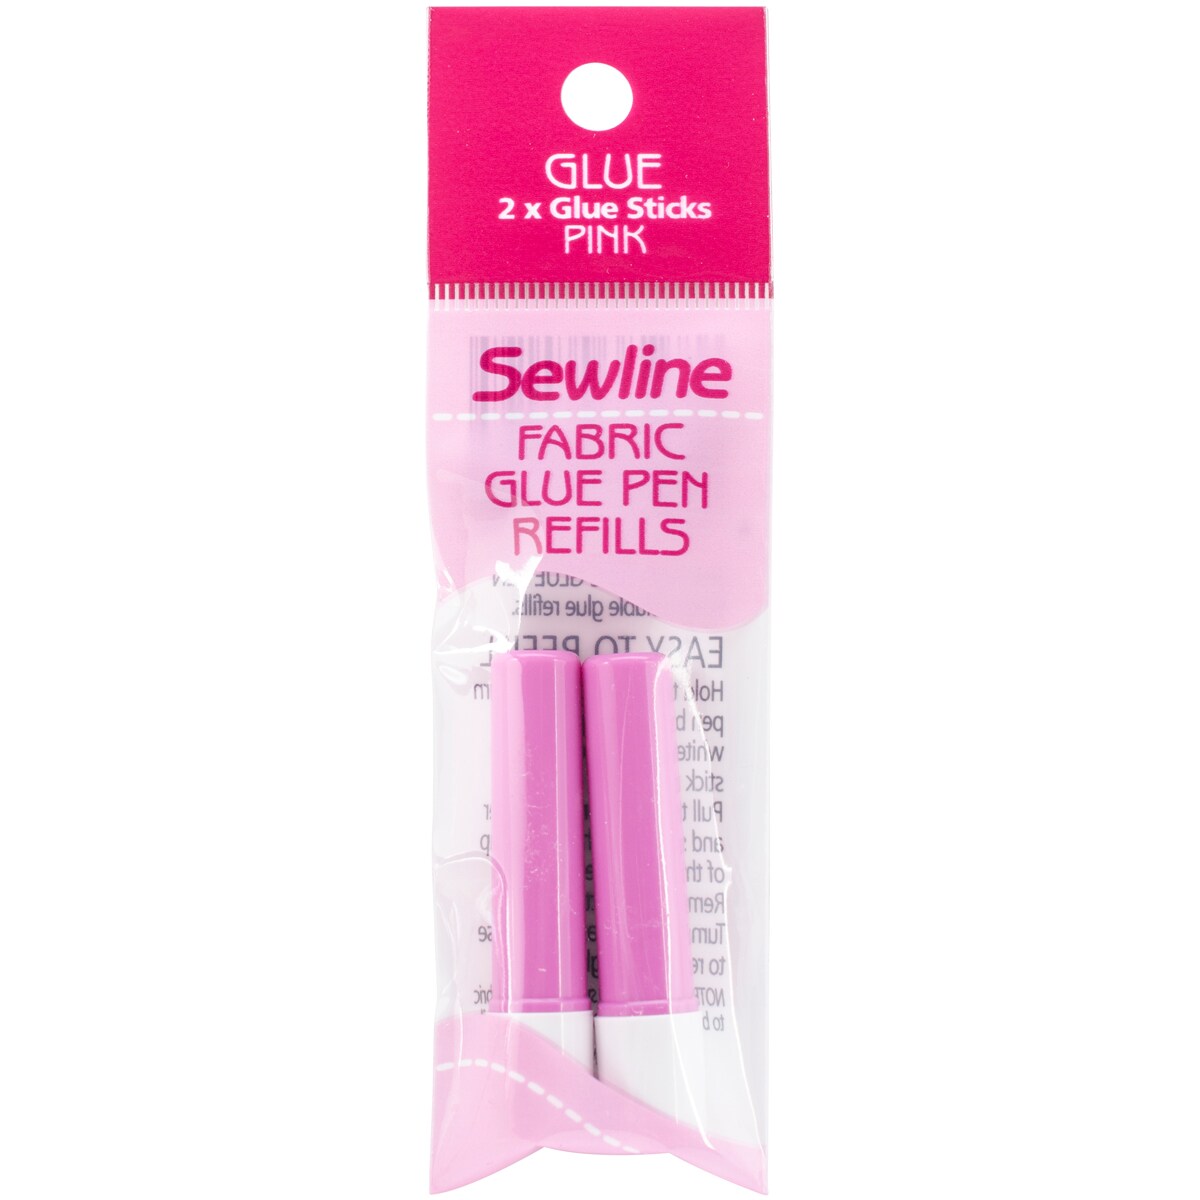 Sewline Water-Soluble Fabric Glue Pen Refill 2/Pkg-Pink